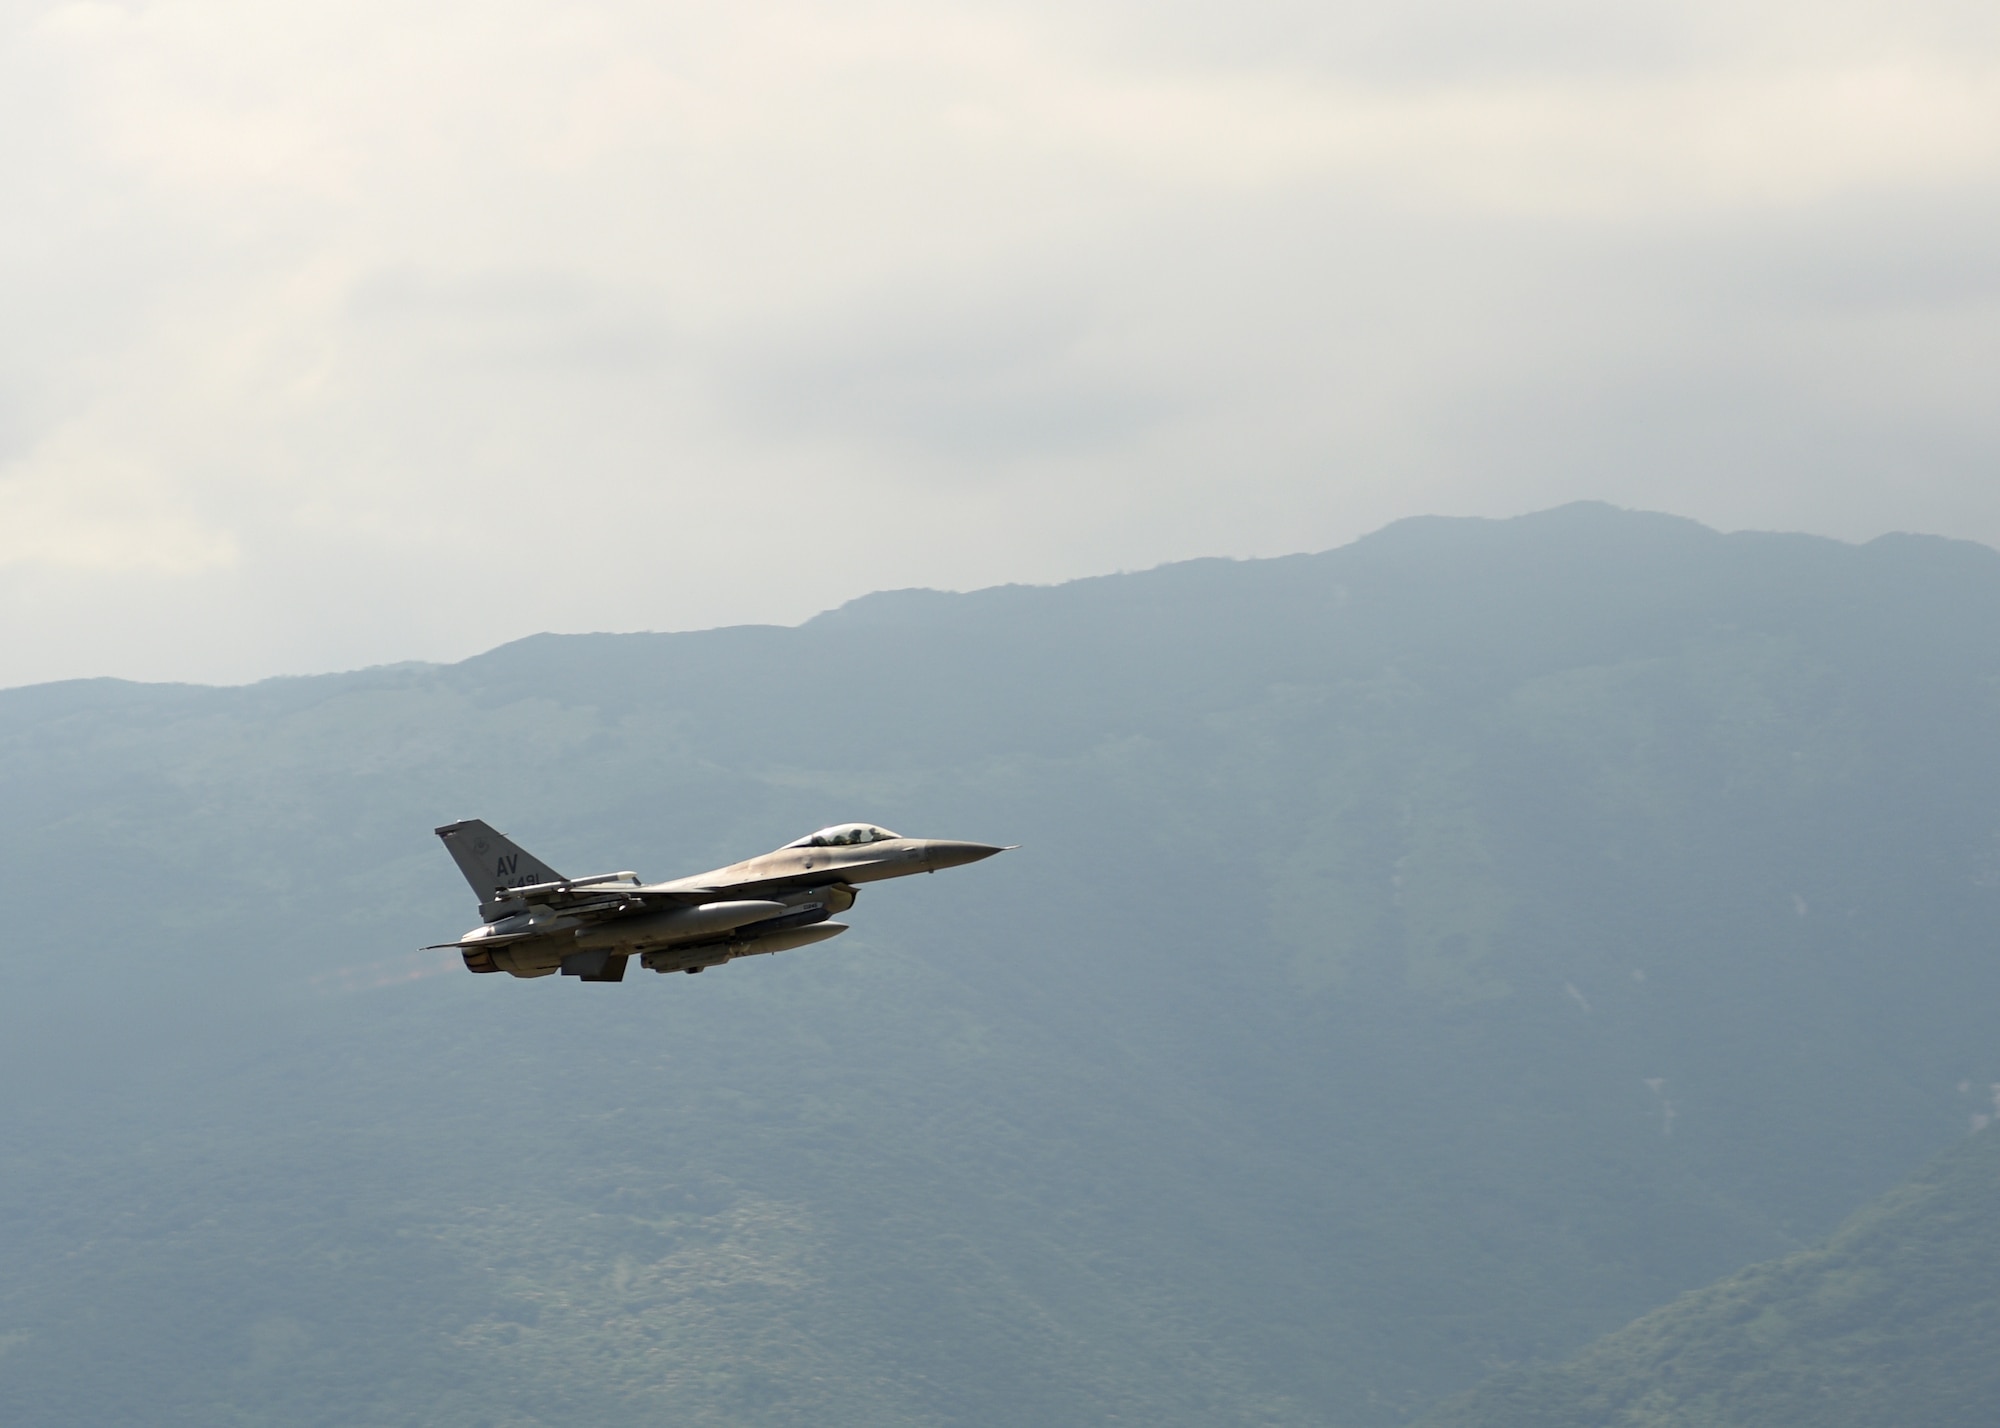 A U.S. Air Force F-16 Fighting Falcon from the 510th Fighter Squadron takes flight in support of Operation Porcupine at Aviano Air Base, Italy, June 30, 2020. Operation Porcupine is an annual exercise to train on inoperability within the 31st Fighter Wing units.  (U.S. Air Force photo by Staff Sgt. Heidi Goodsell)